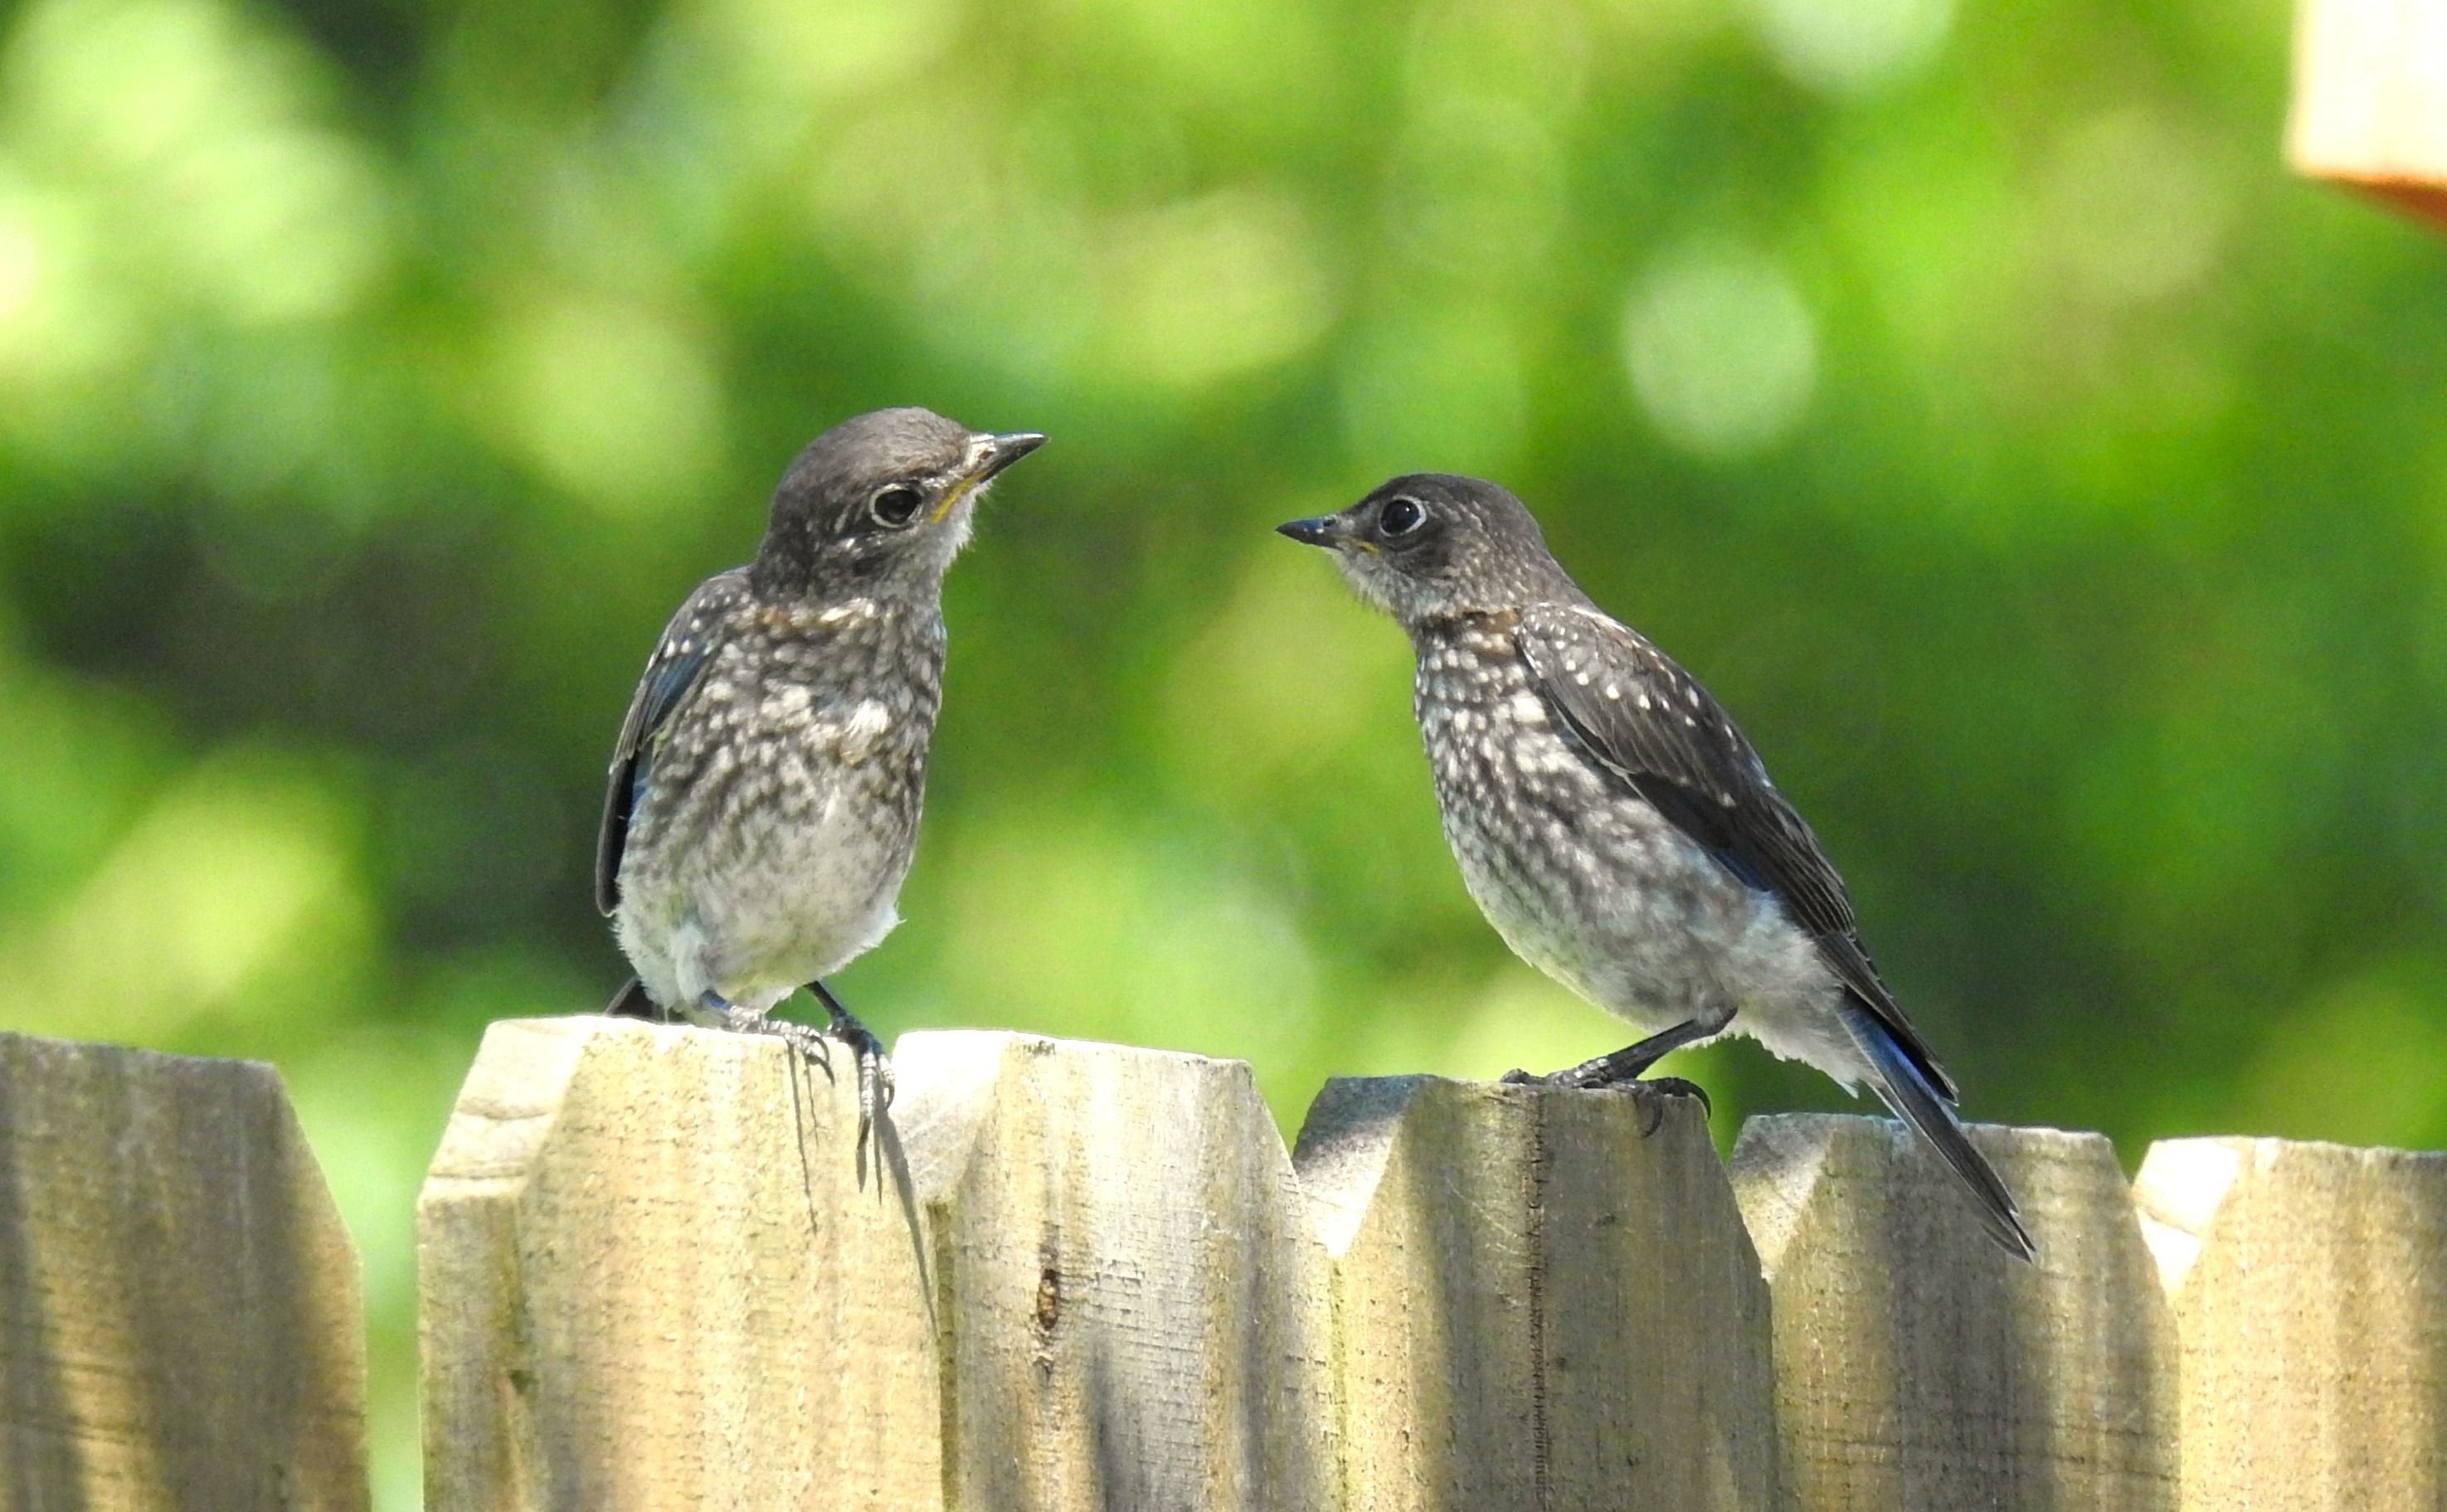 Juvenile bluebirds perched on fence. 